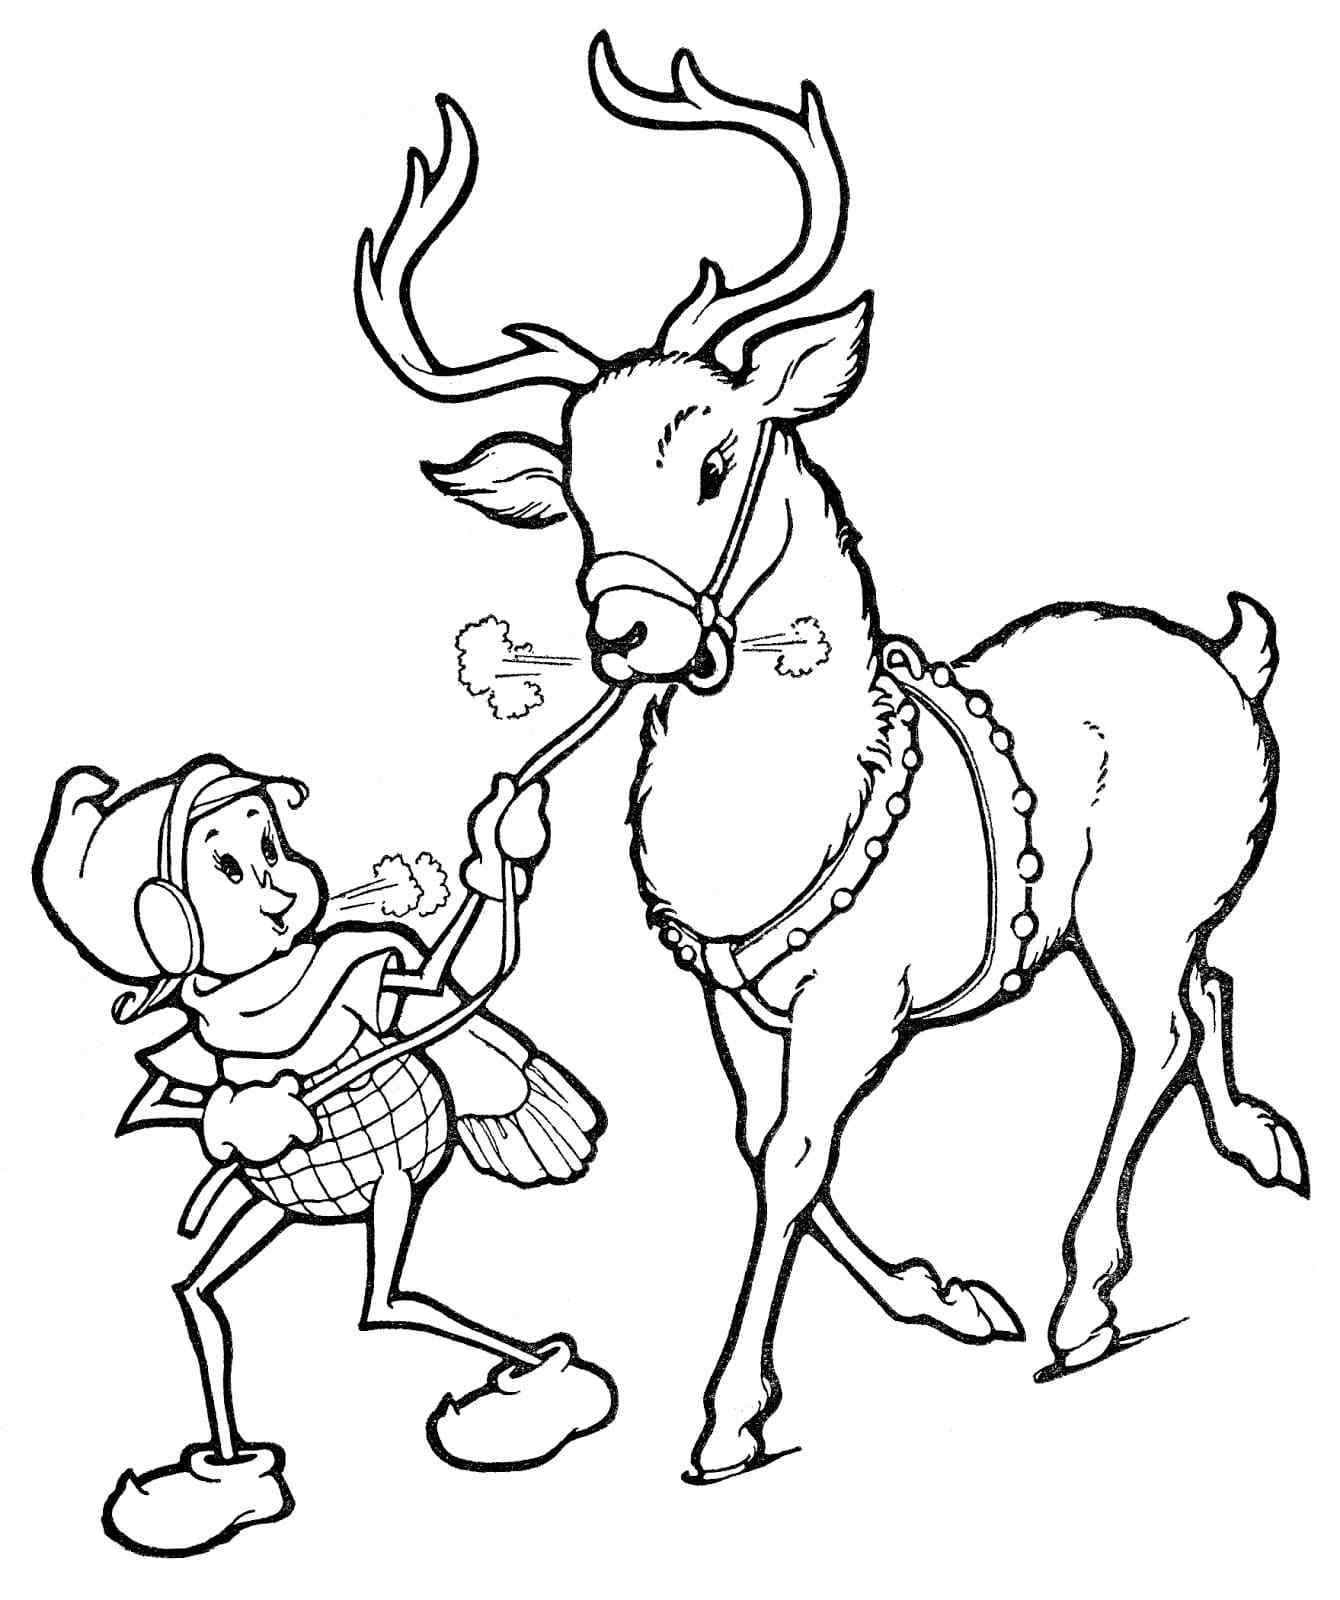 Elf Leads The Deer To The Harness Coloring Page